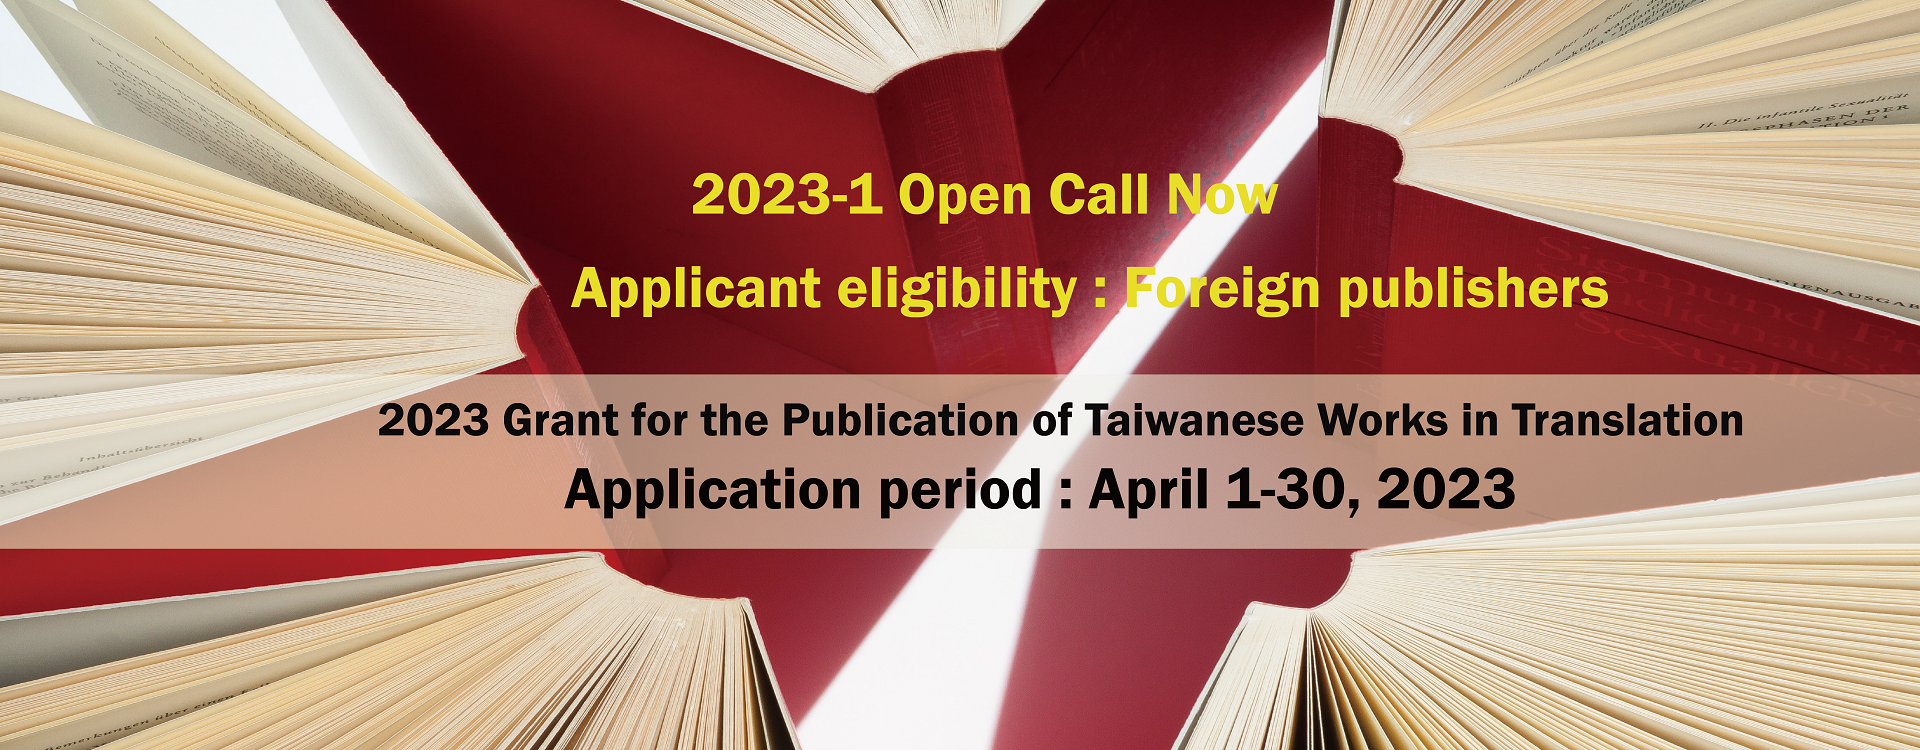 2023 Grant for the Publication of Taiwanese Works in Translation Open Call Now